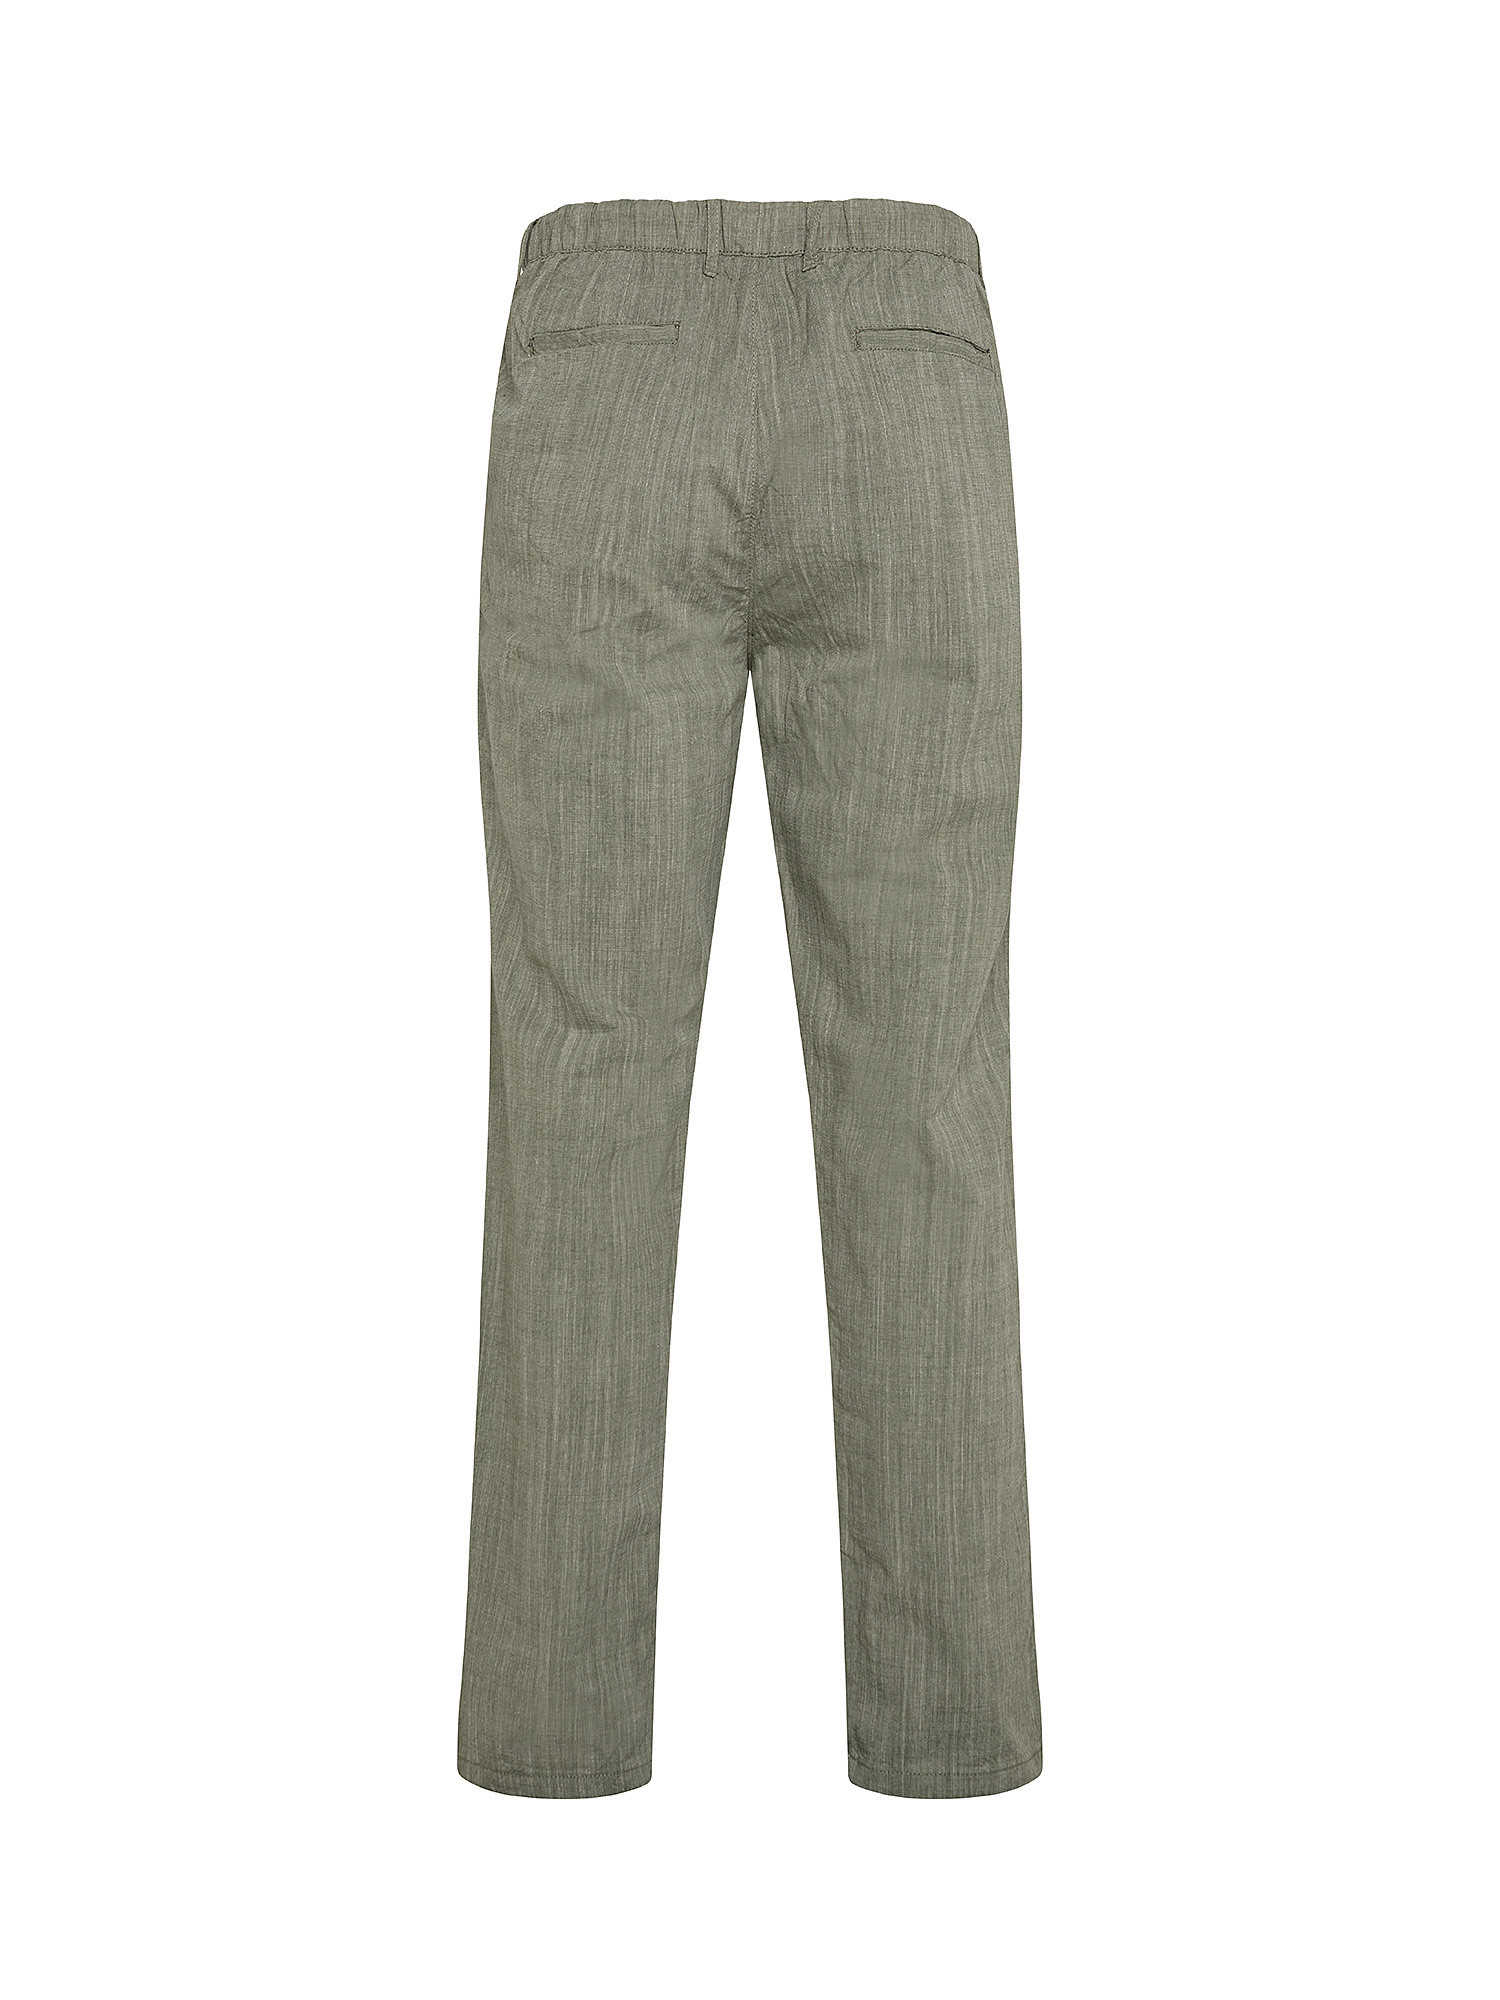 Pantalone con coulisse, Verde, large image number 1